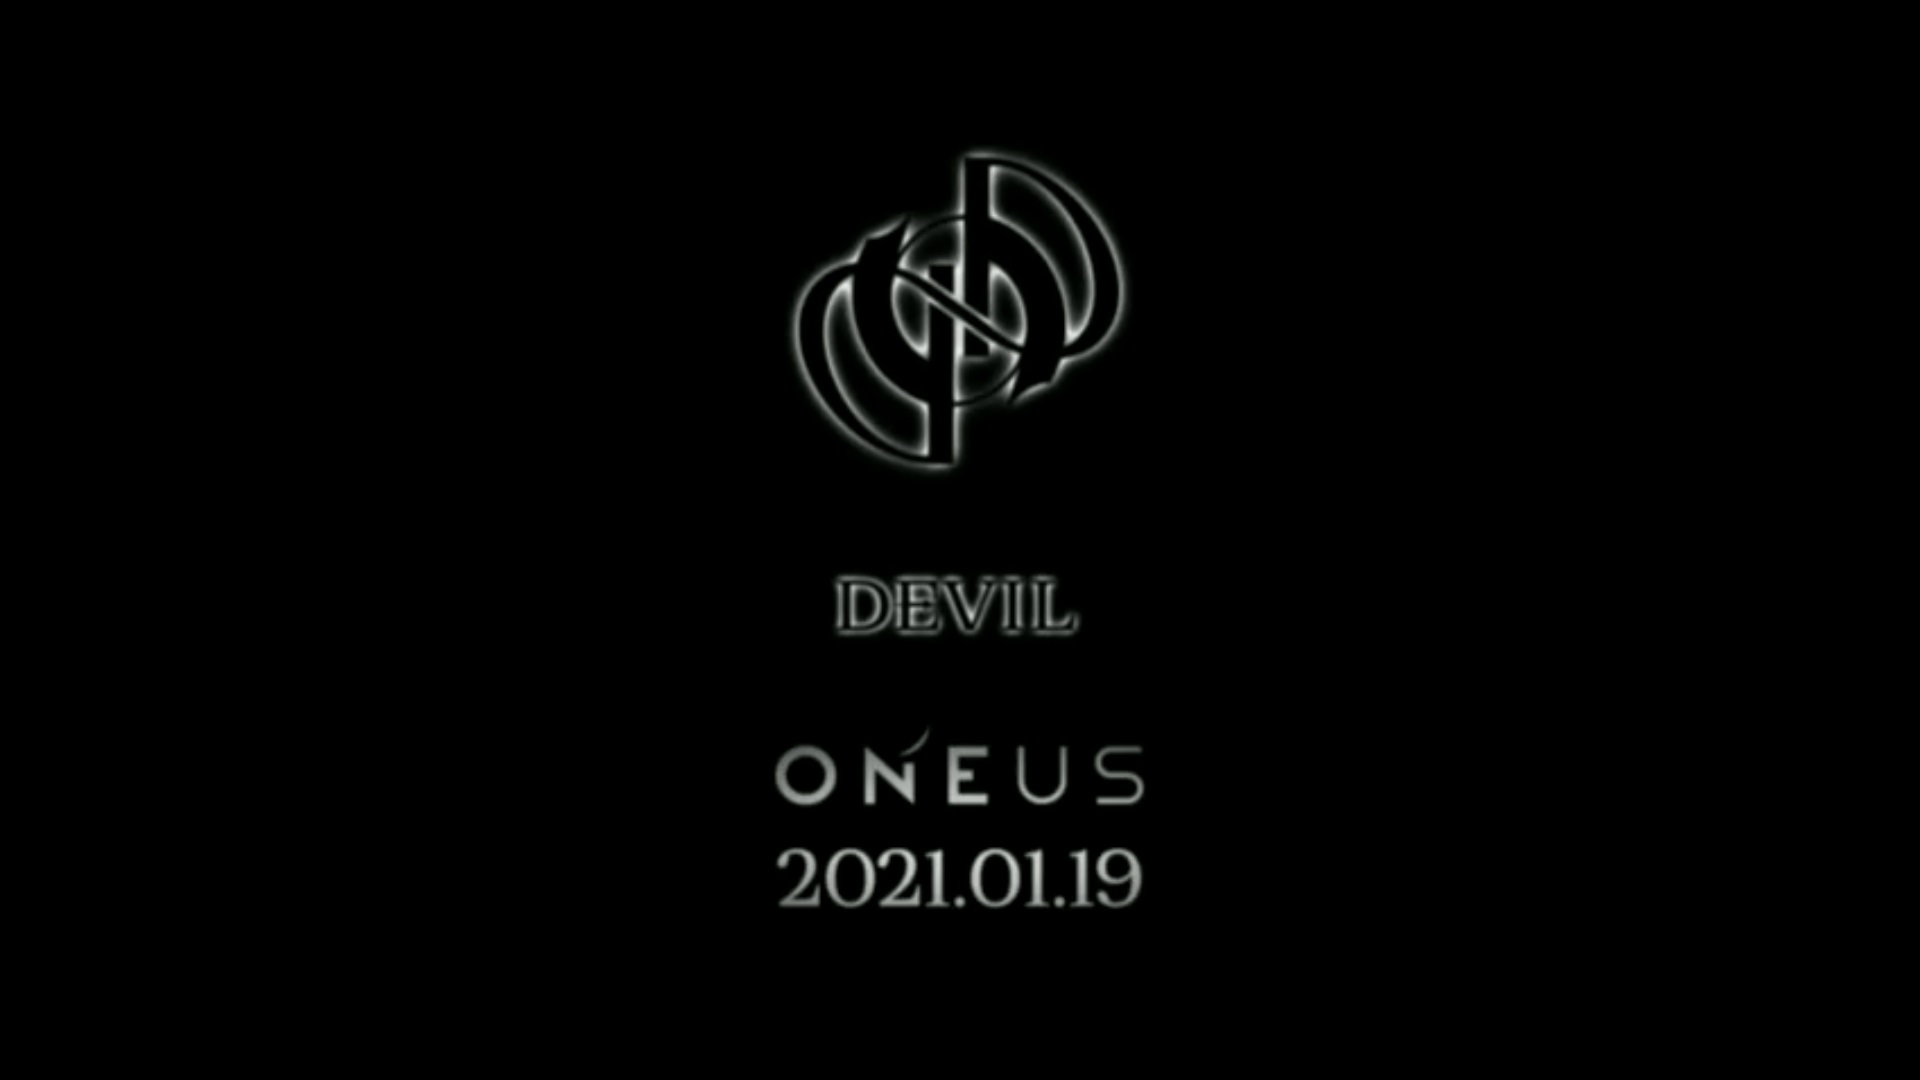 oneus-to-make-comeback-with-new-album-devil-on-january-19